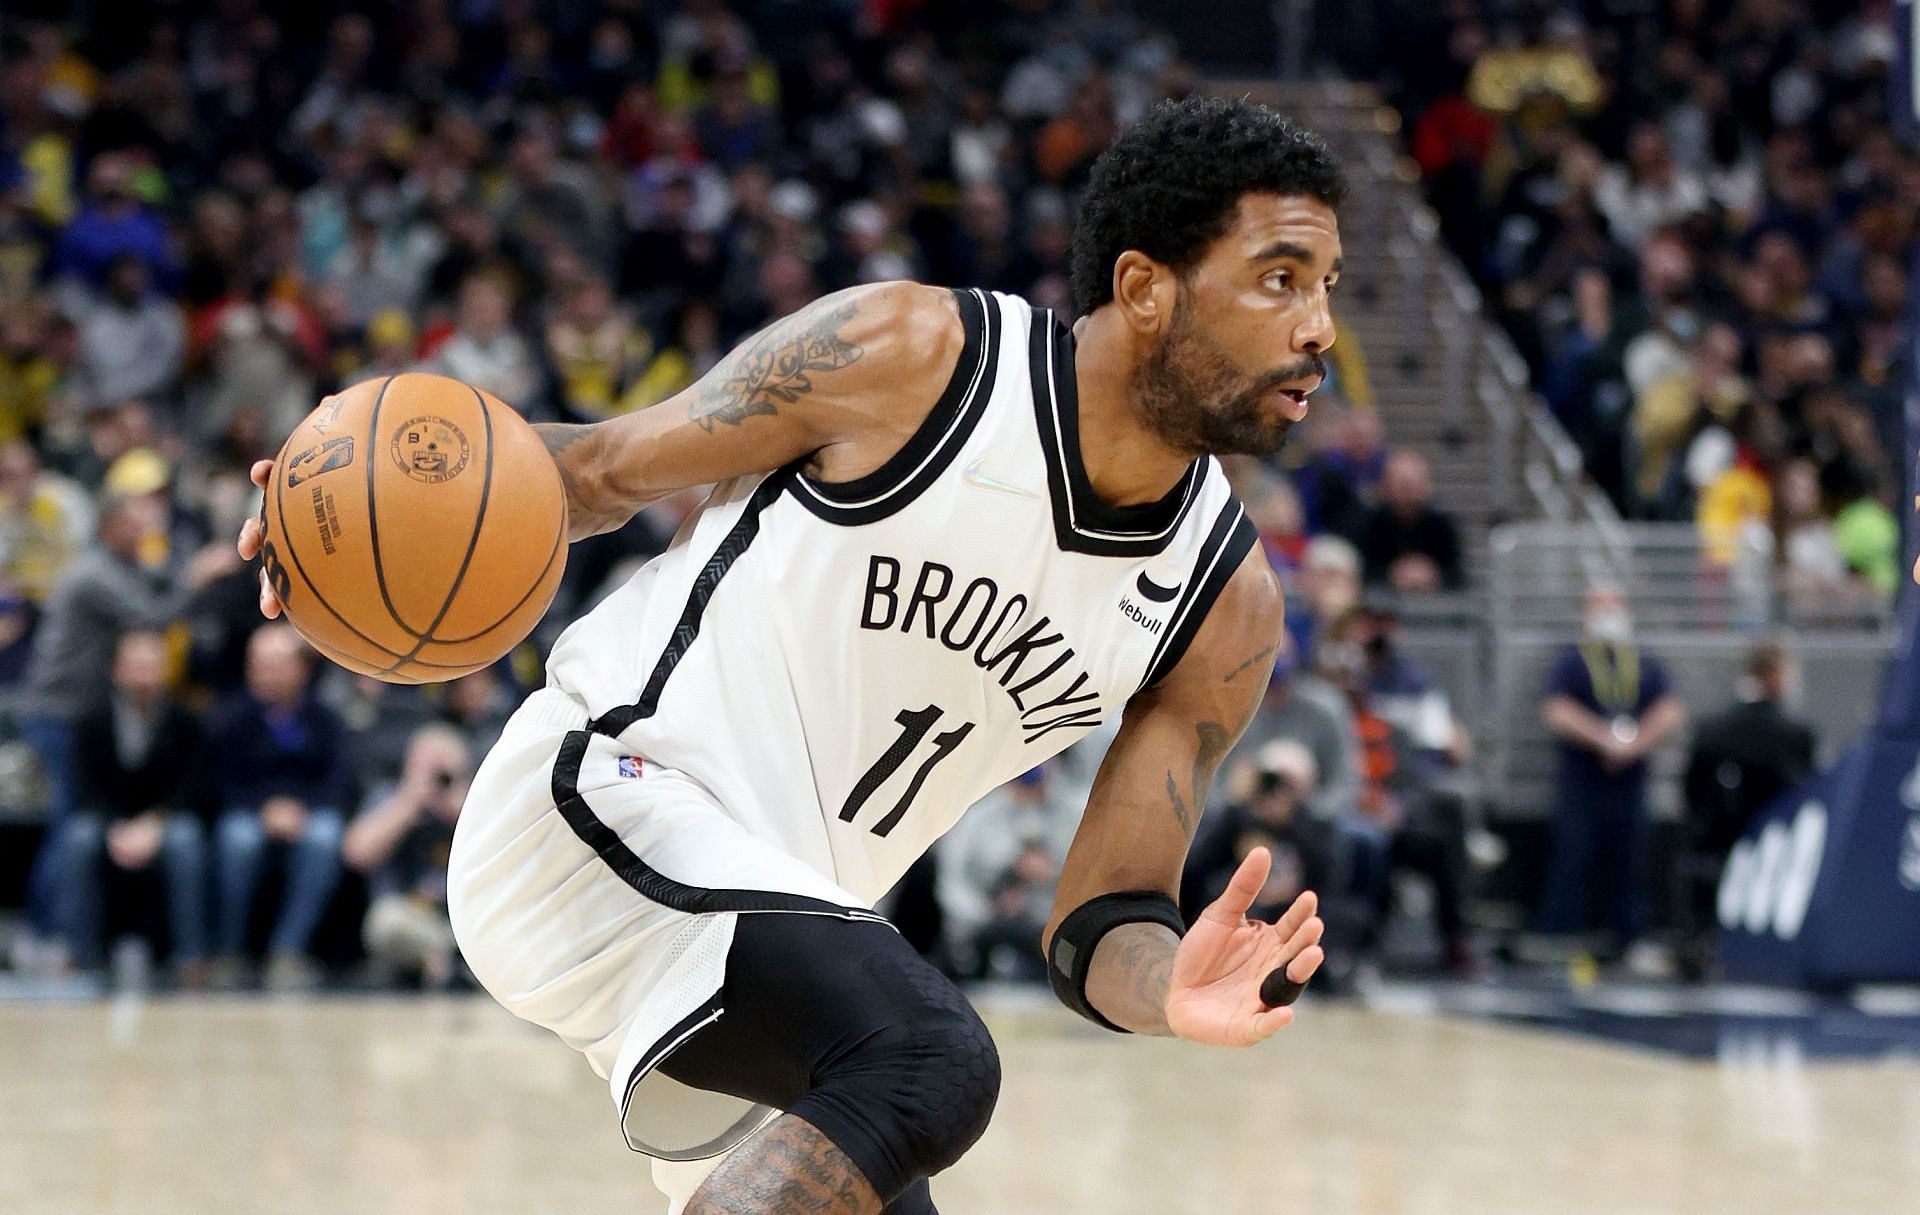 Kyrie Irving had 22 points in his first game back for the Brooklyn Nets